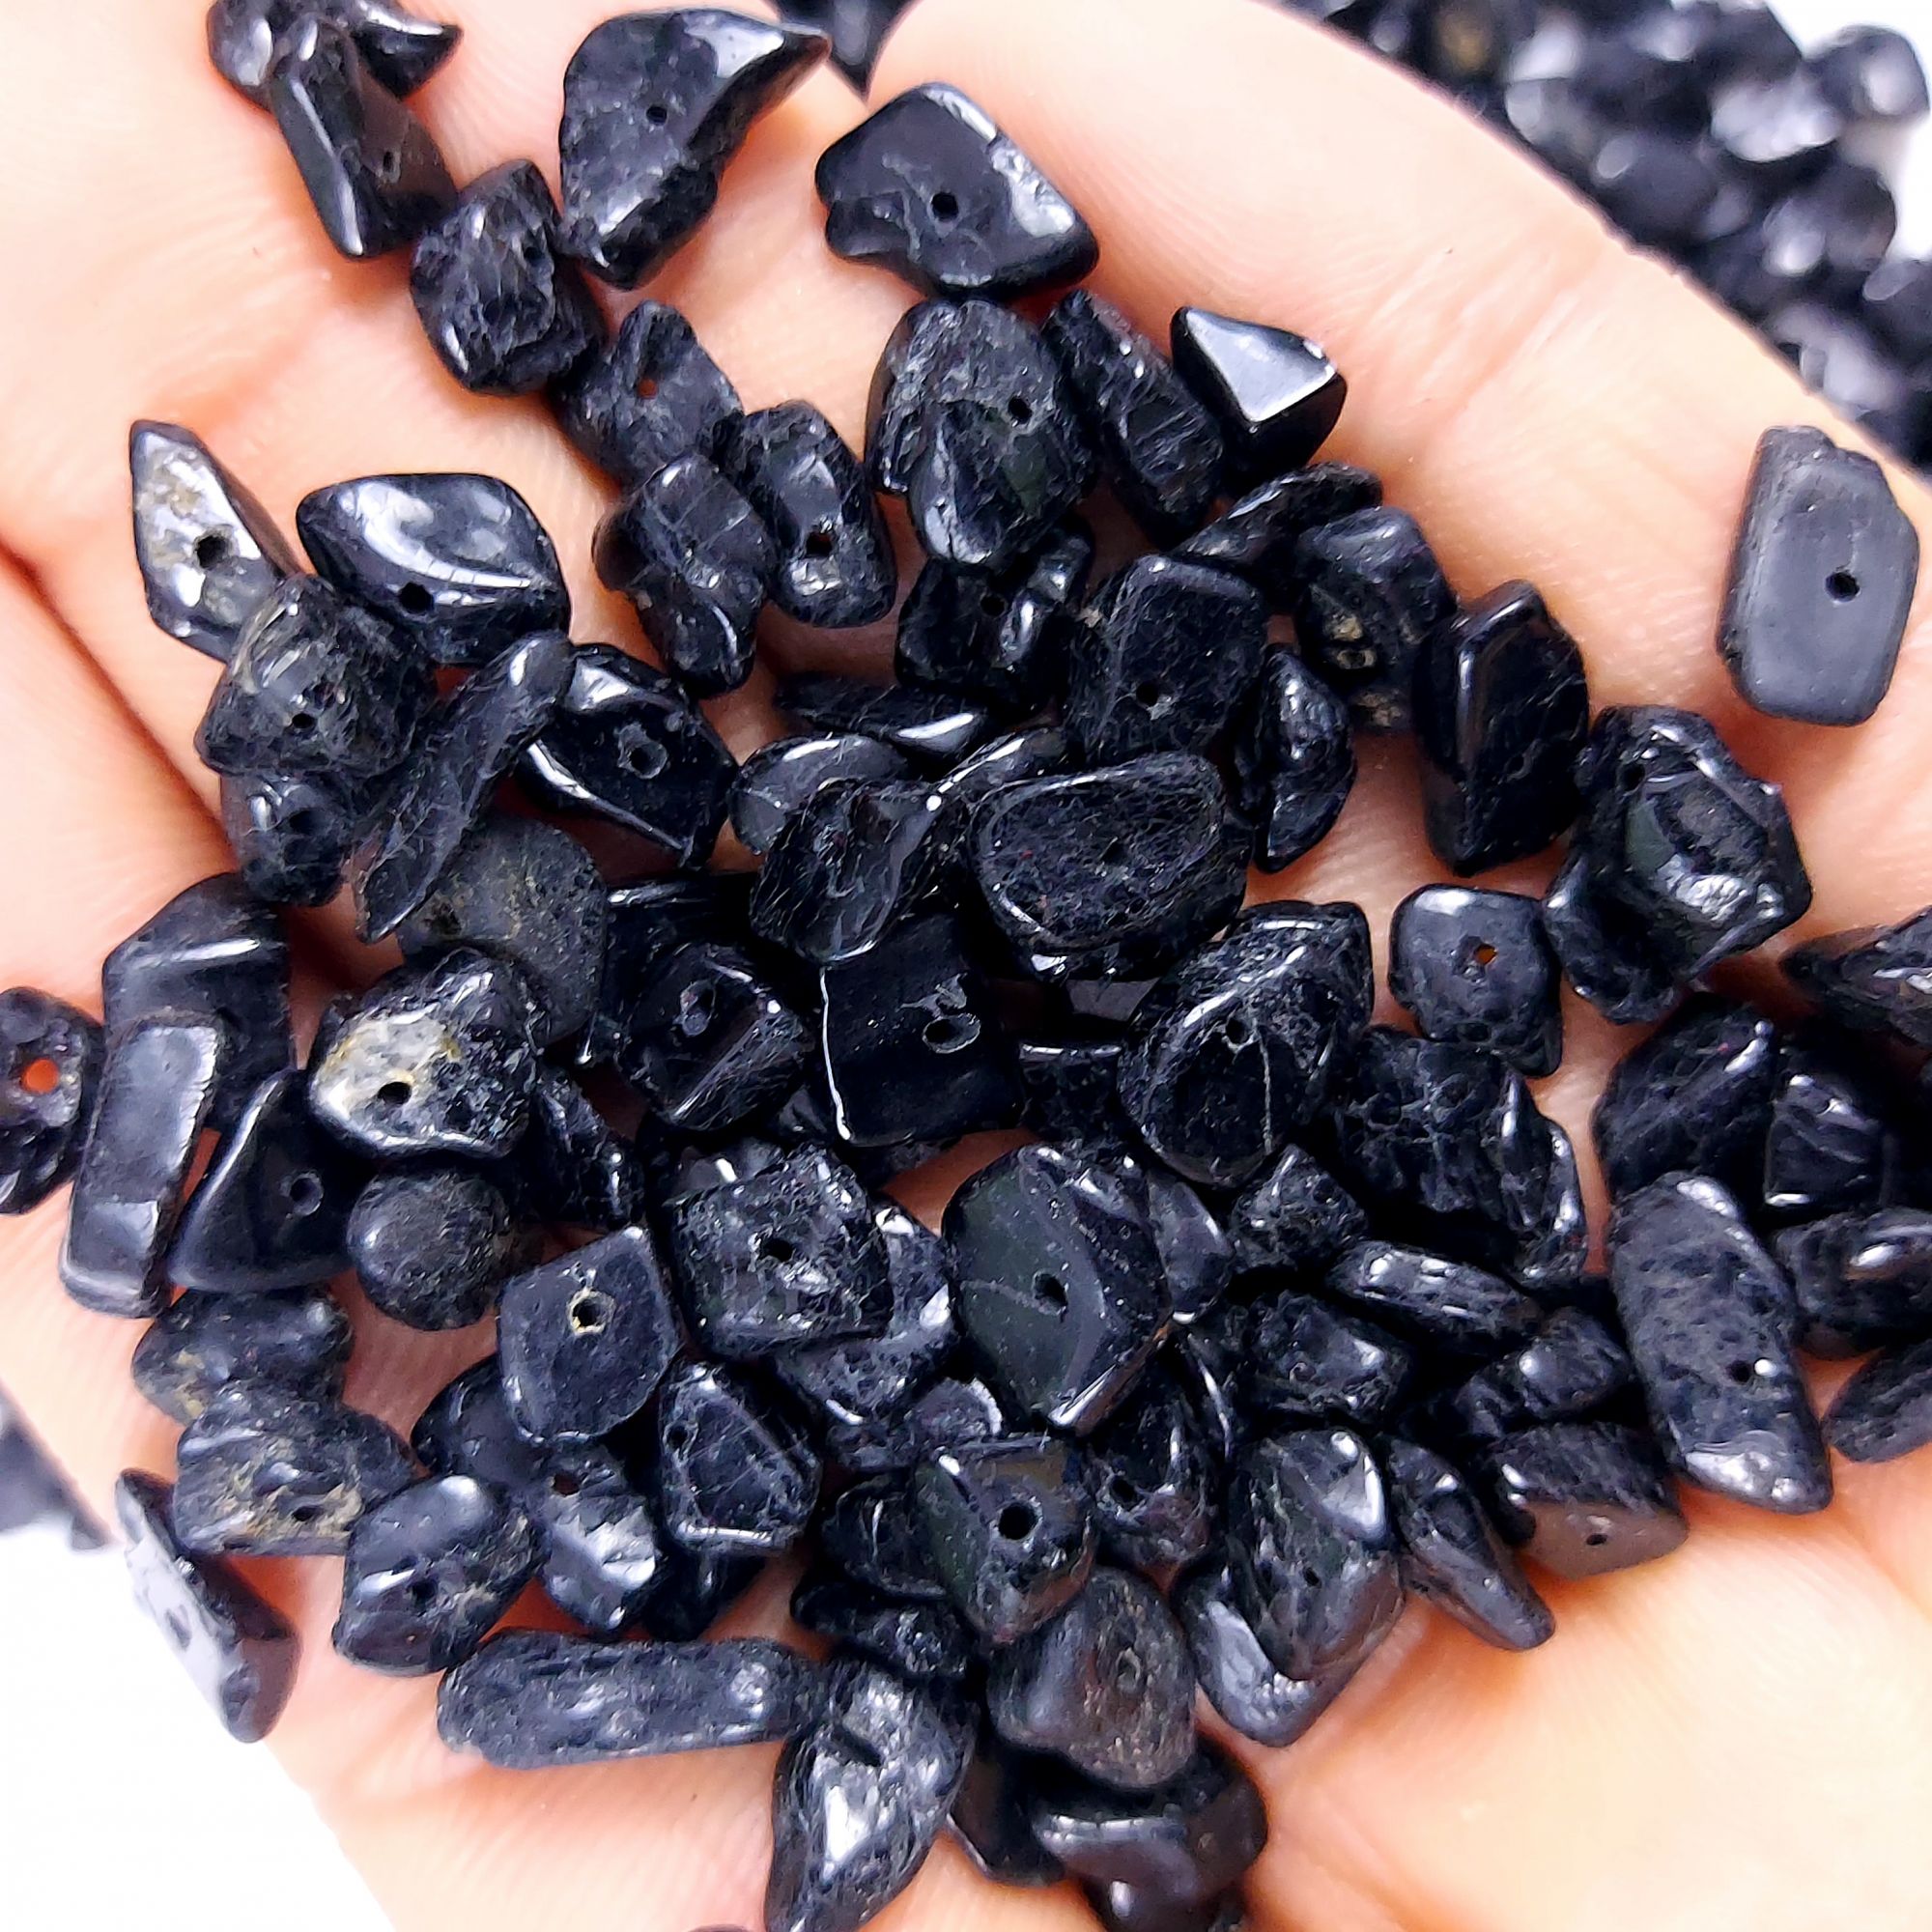 784Pcs 963Cts  Natural Black Tourmaline Gemstone Chips Uncut Beads for Jewelry Making Center Drill Loose Gemstones Nuggets Chips Smooth Beads Bracelet Gift for Her 9x4 6x4mm#G-407